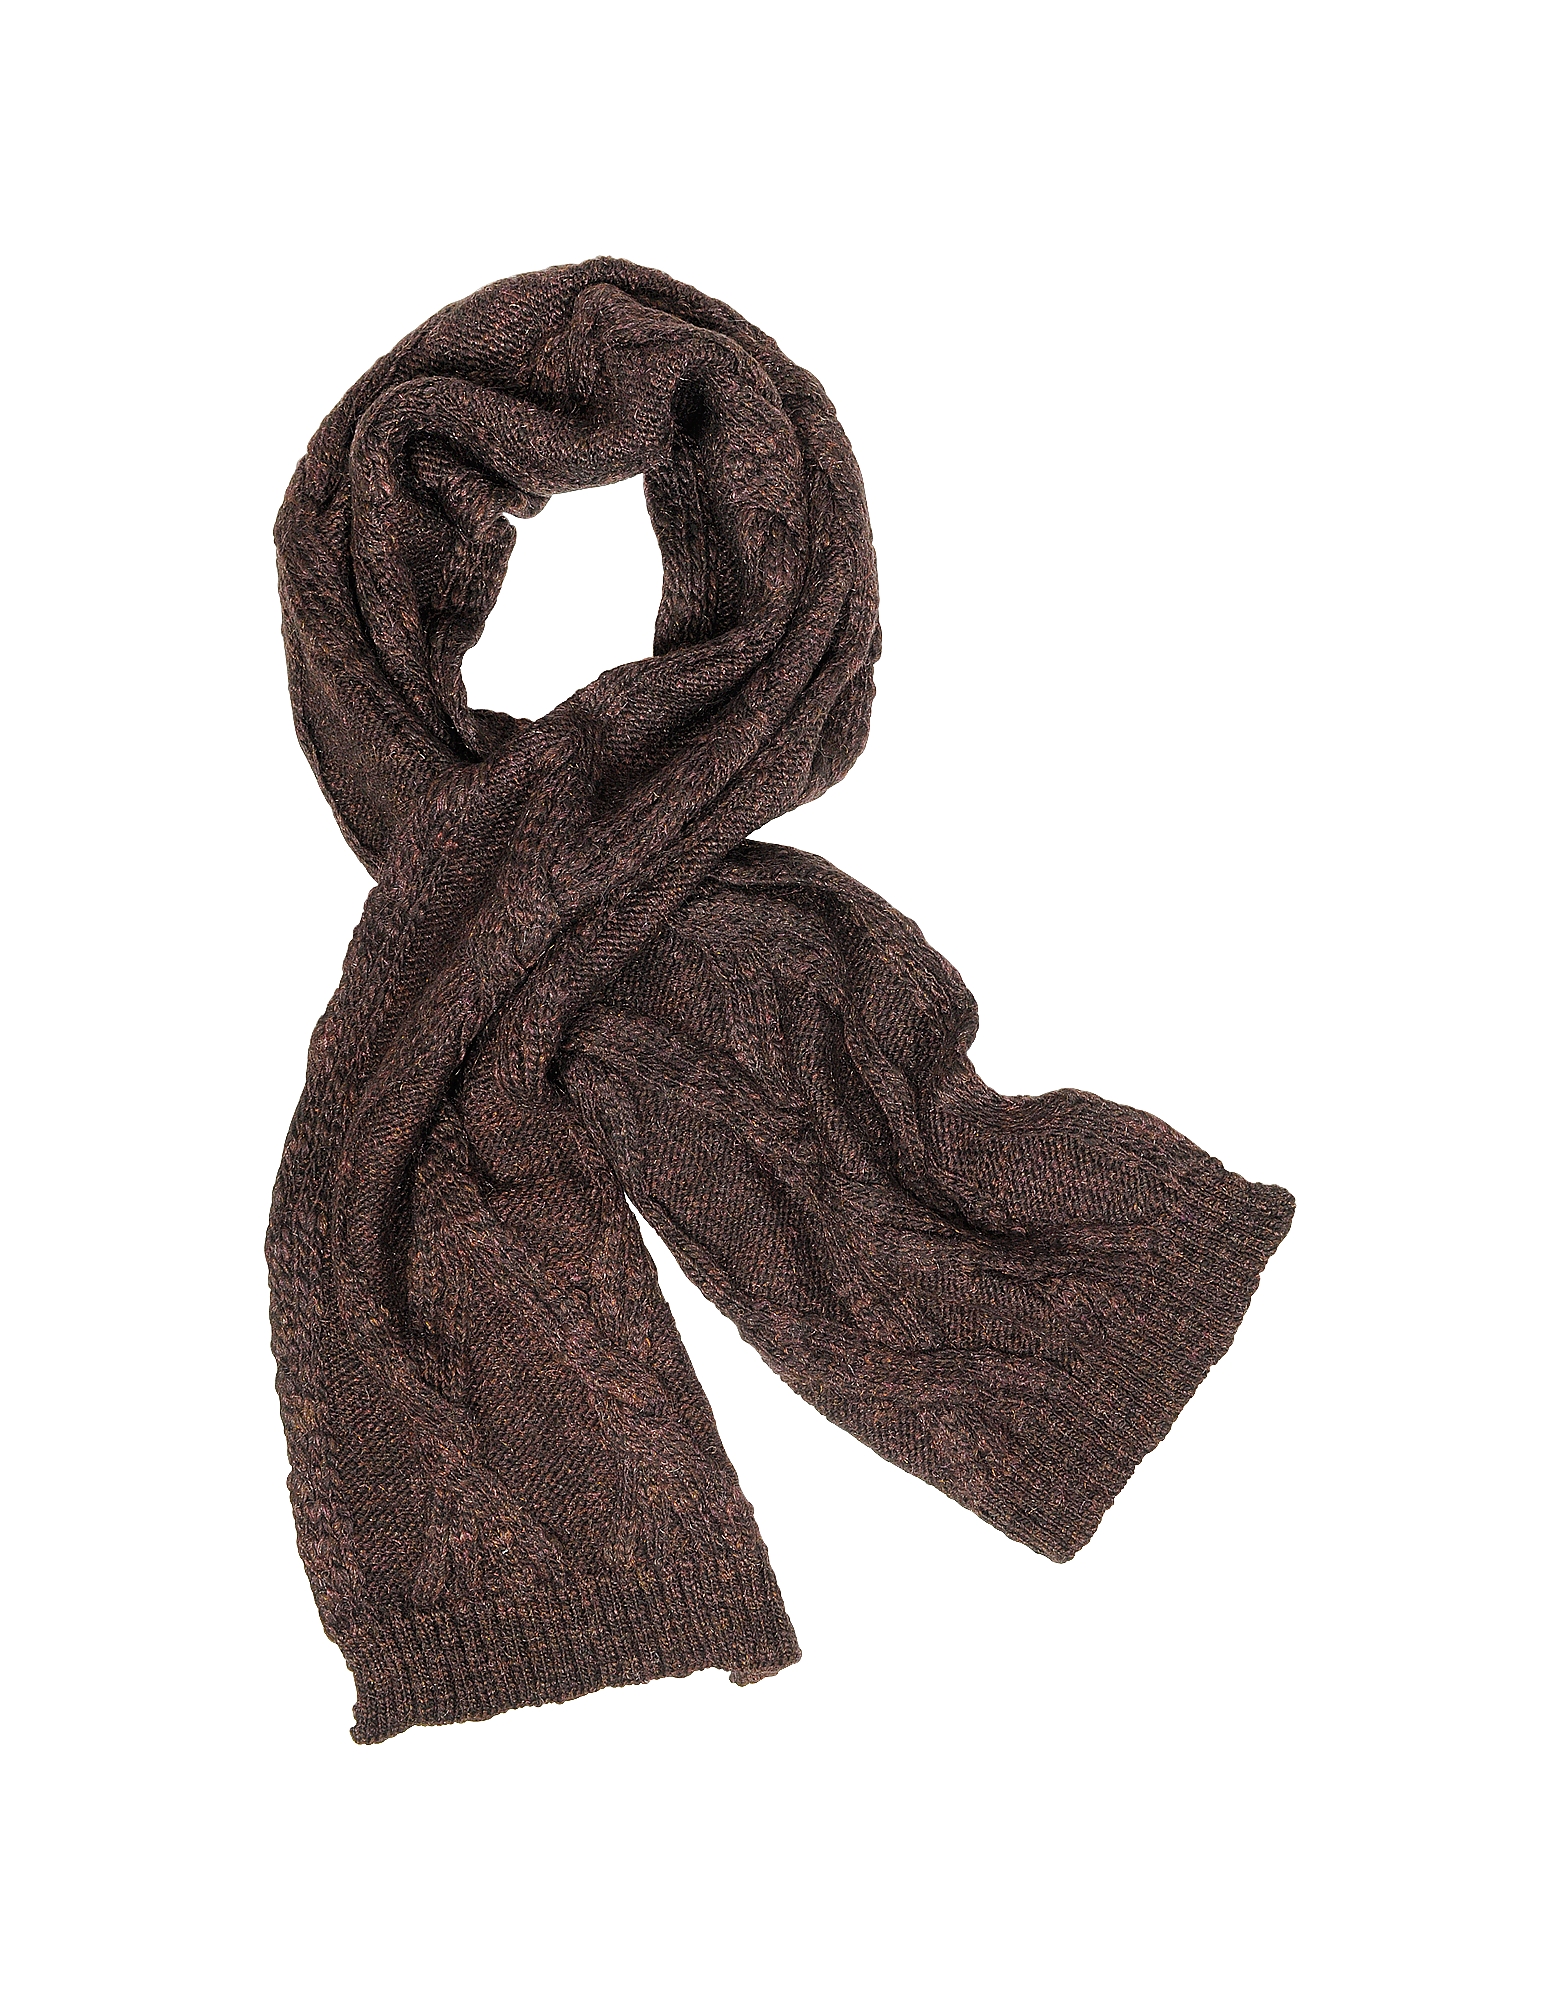 Paul Smith Men's Cable Knit Wool Blend Scarf